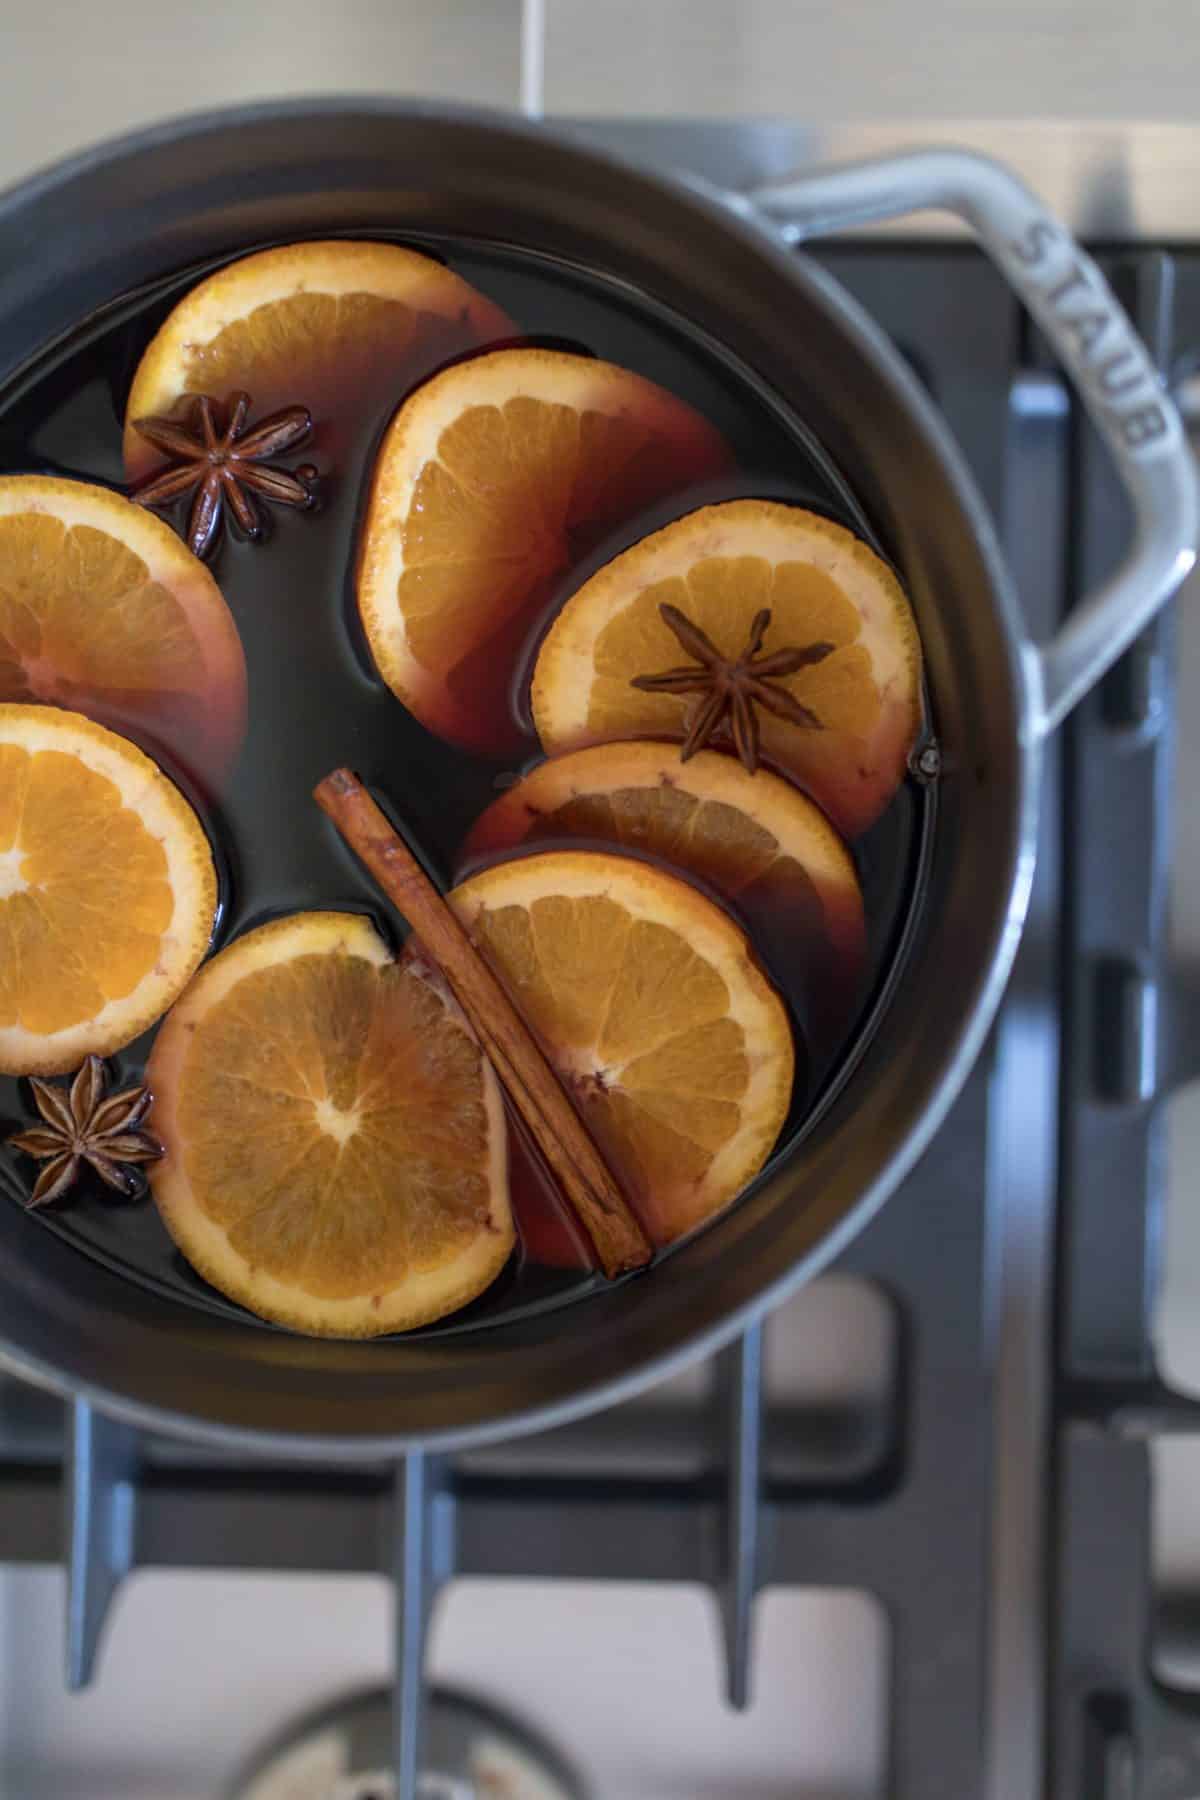 a gray cast iron pot on the stove with mulled wine, orange slices and cinnamon sticks.